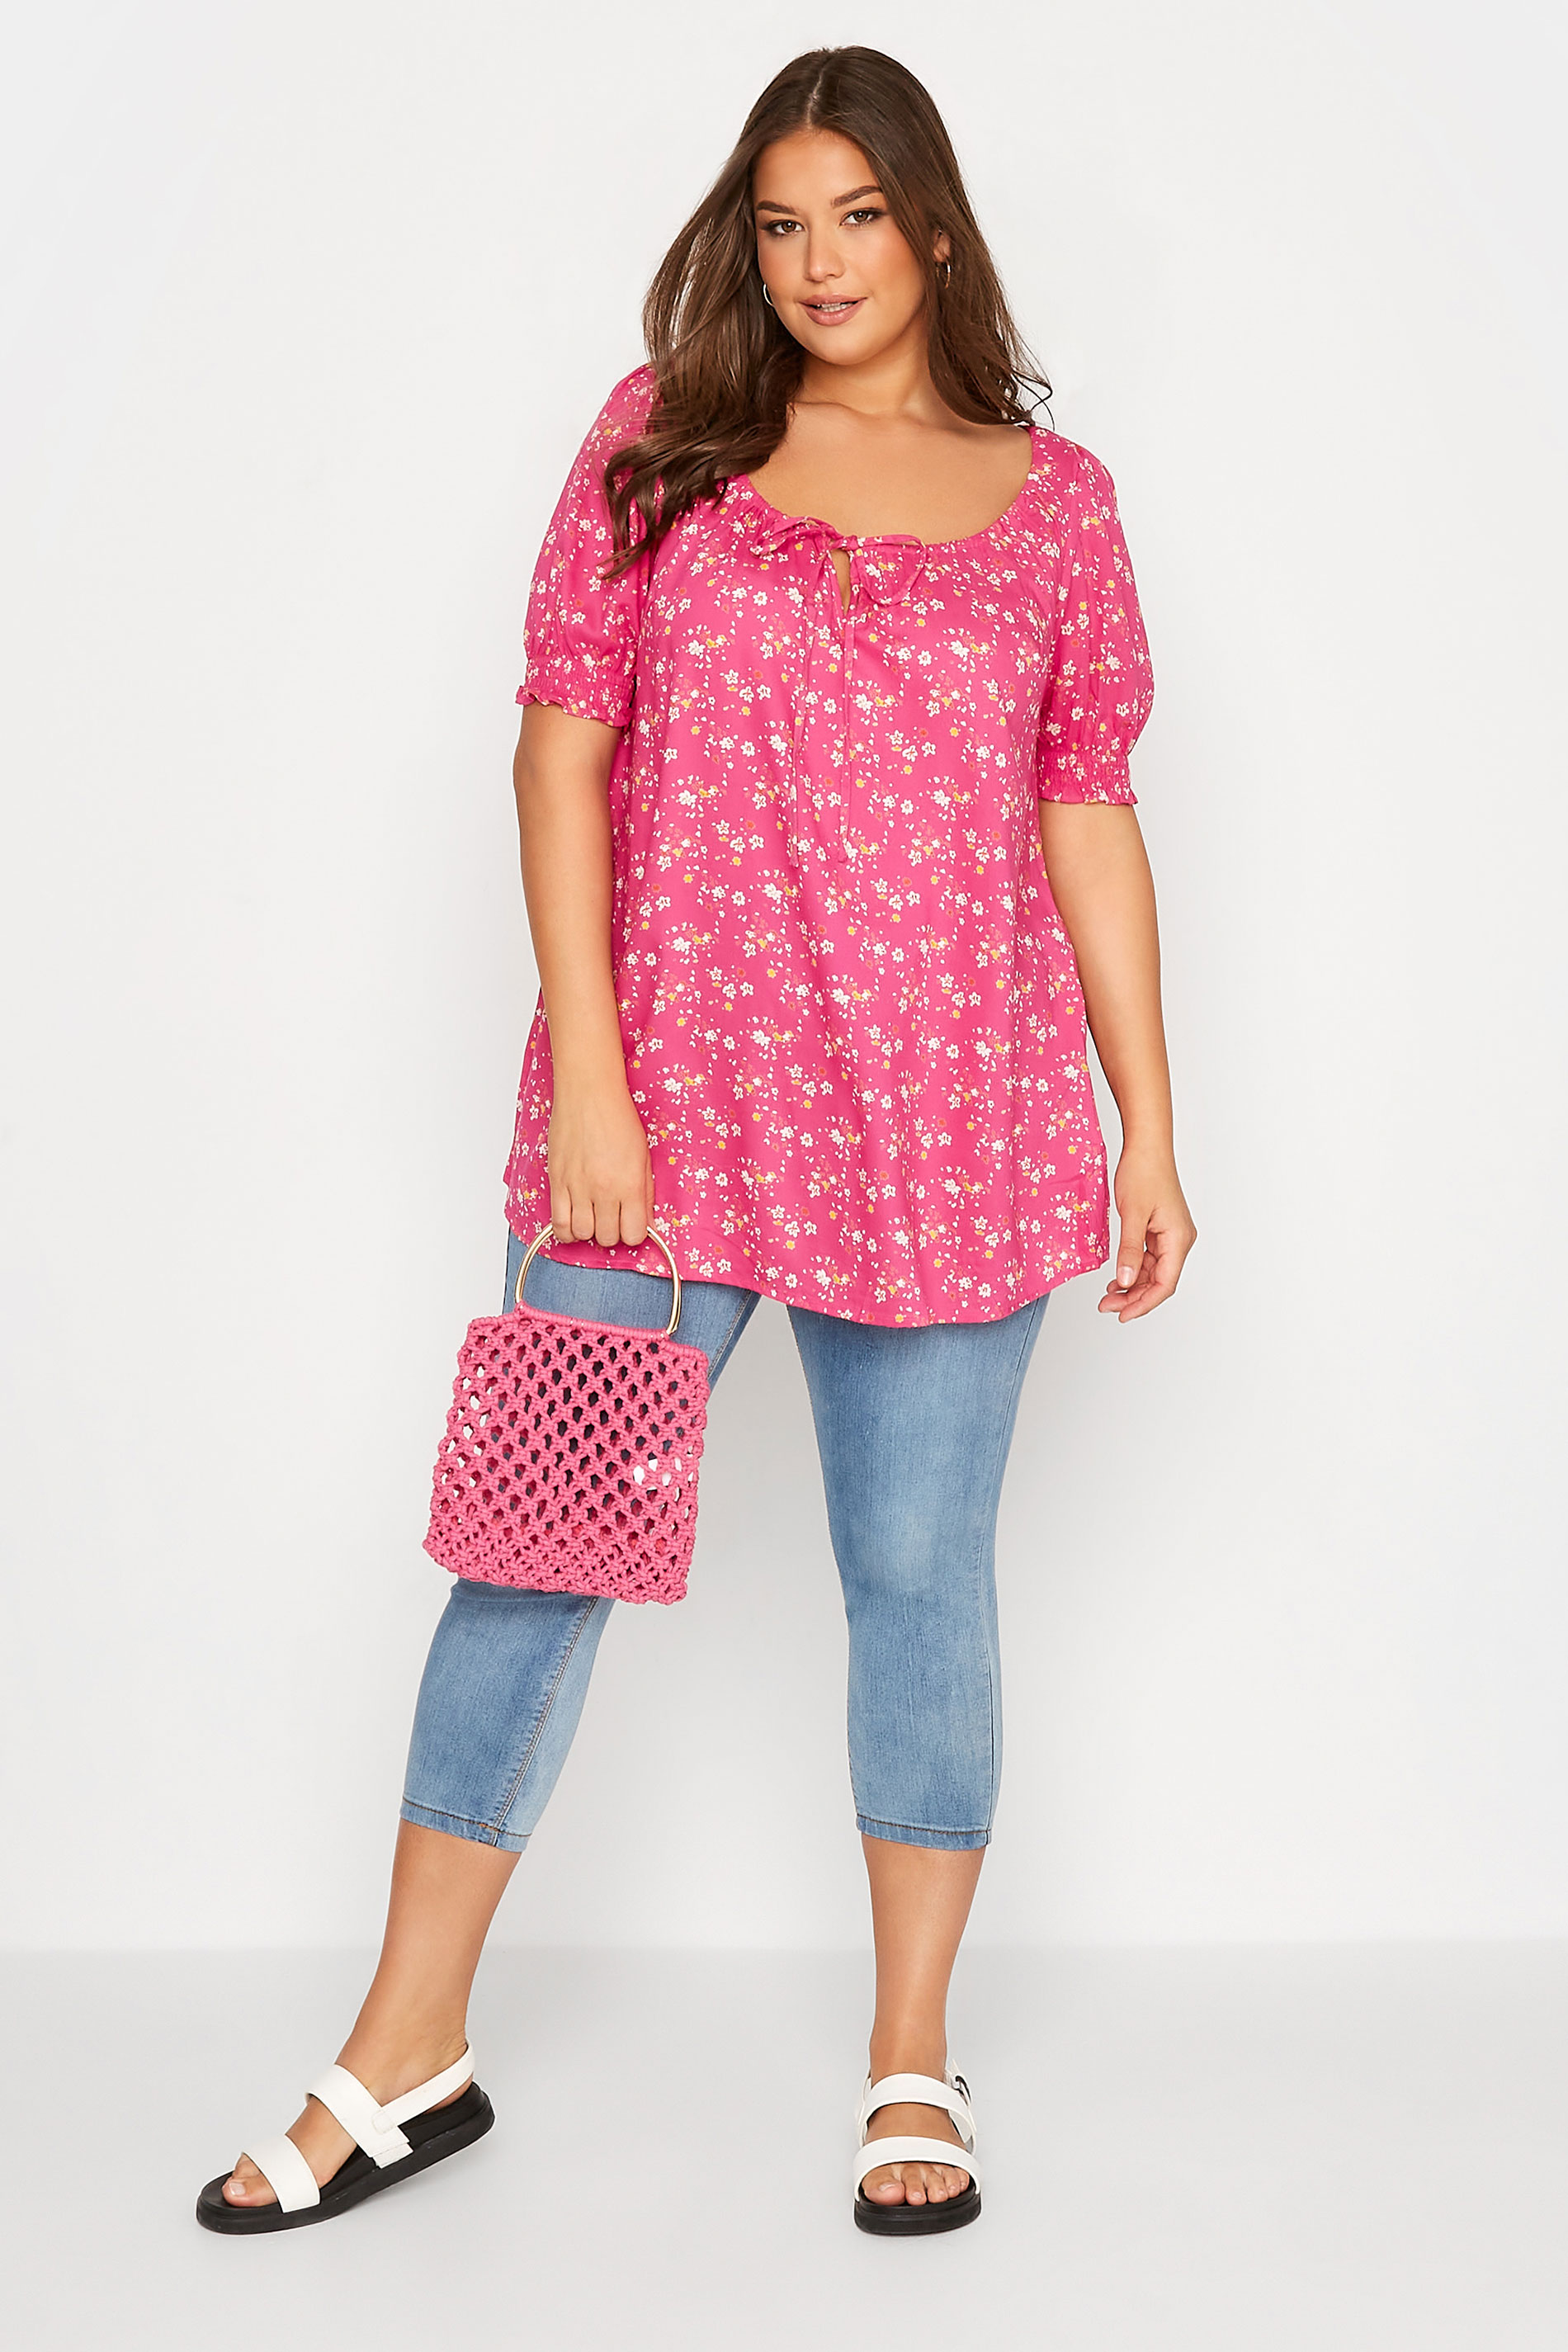 Grande taille  Tops Grande taille  Tops Bohèmes | Curve Pink Floral Gypsy Top - HB99205